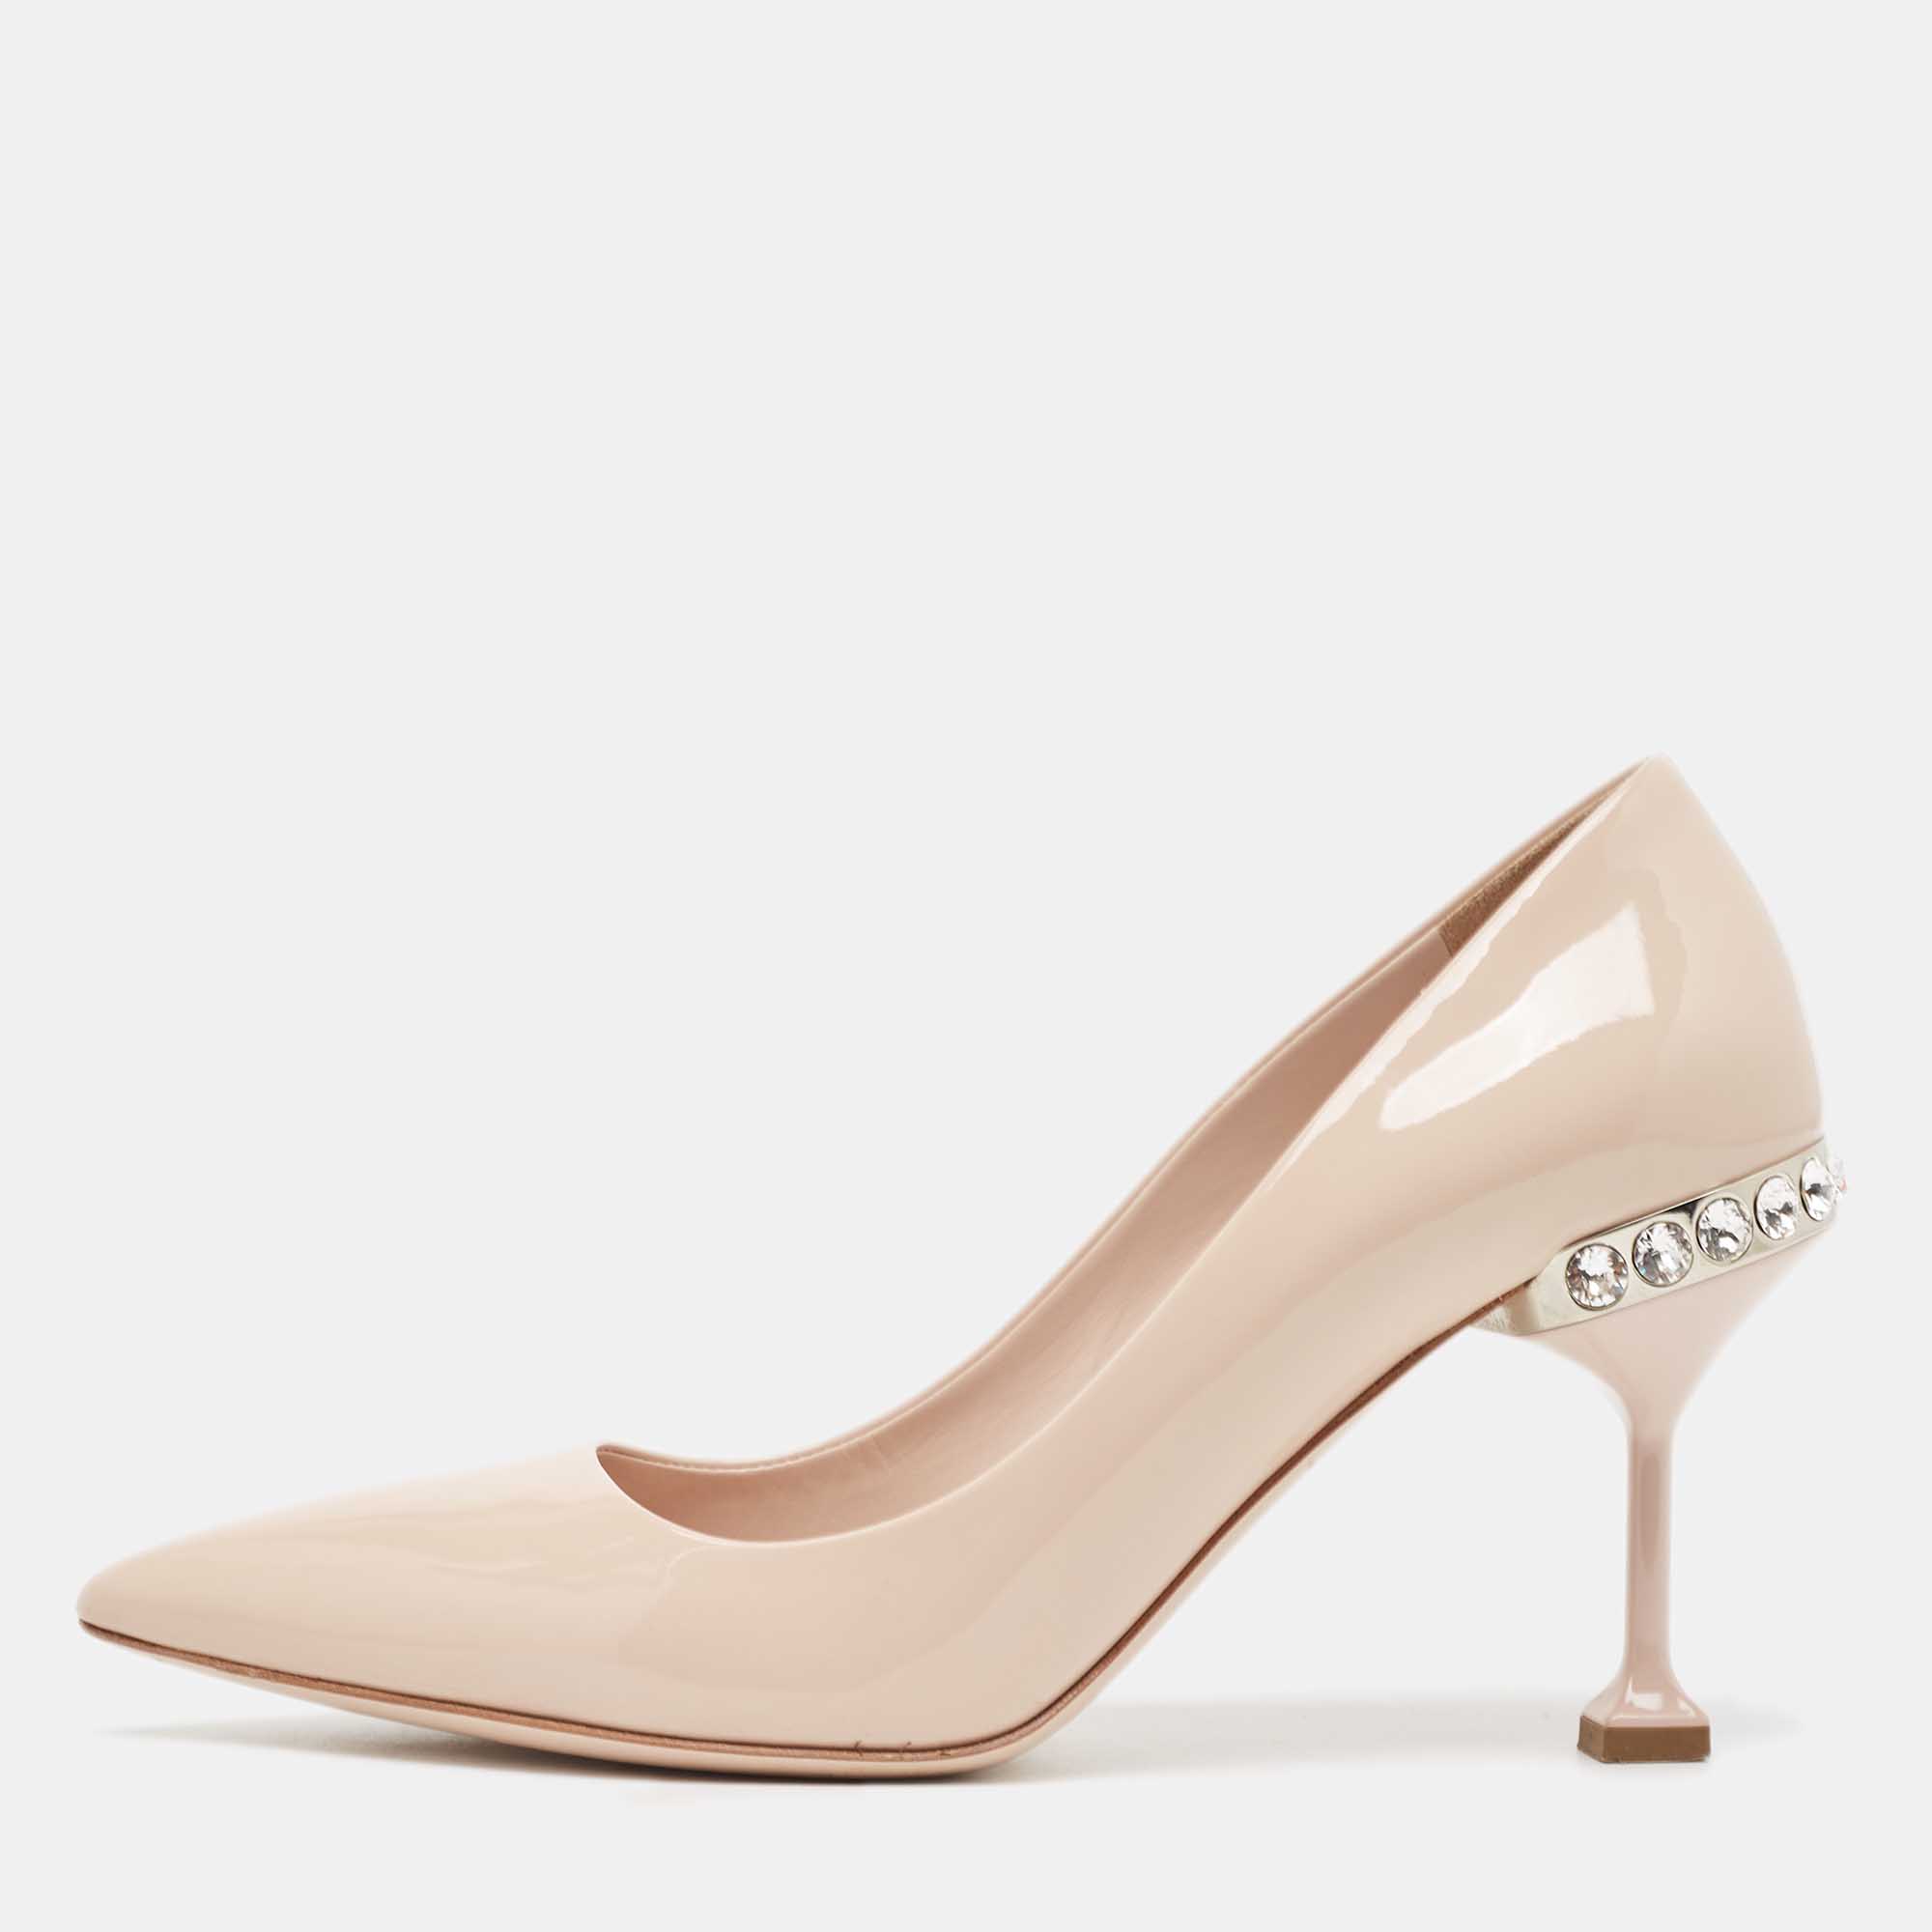 Pre-owned Miu Miu Beige Patent Leather Crystal Embellished Pointed Toe Pumps Size 37